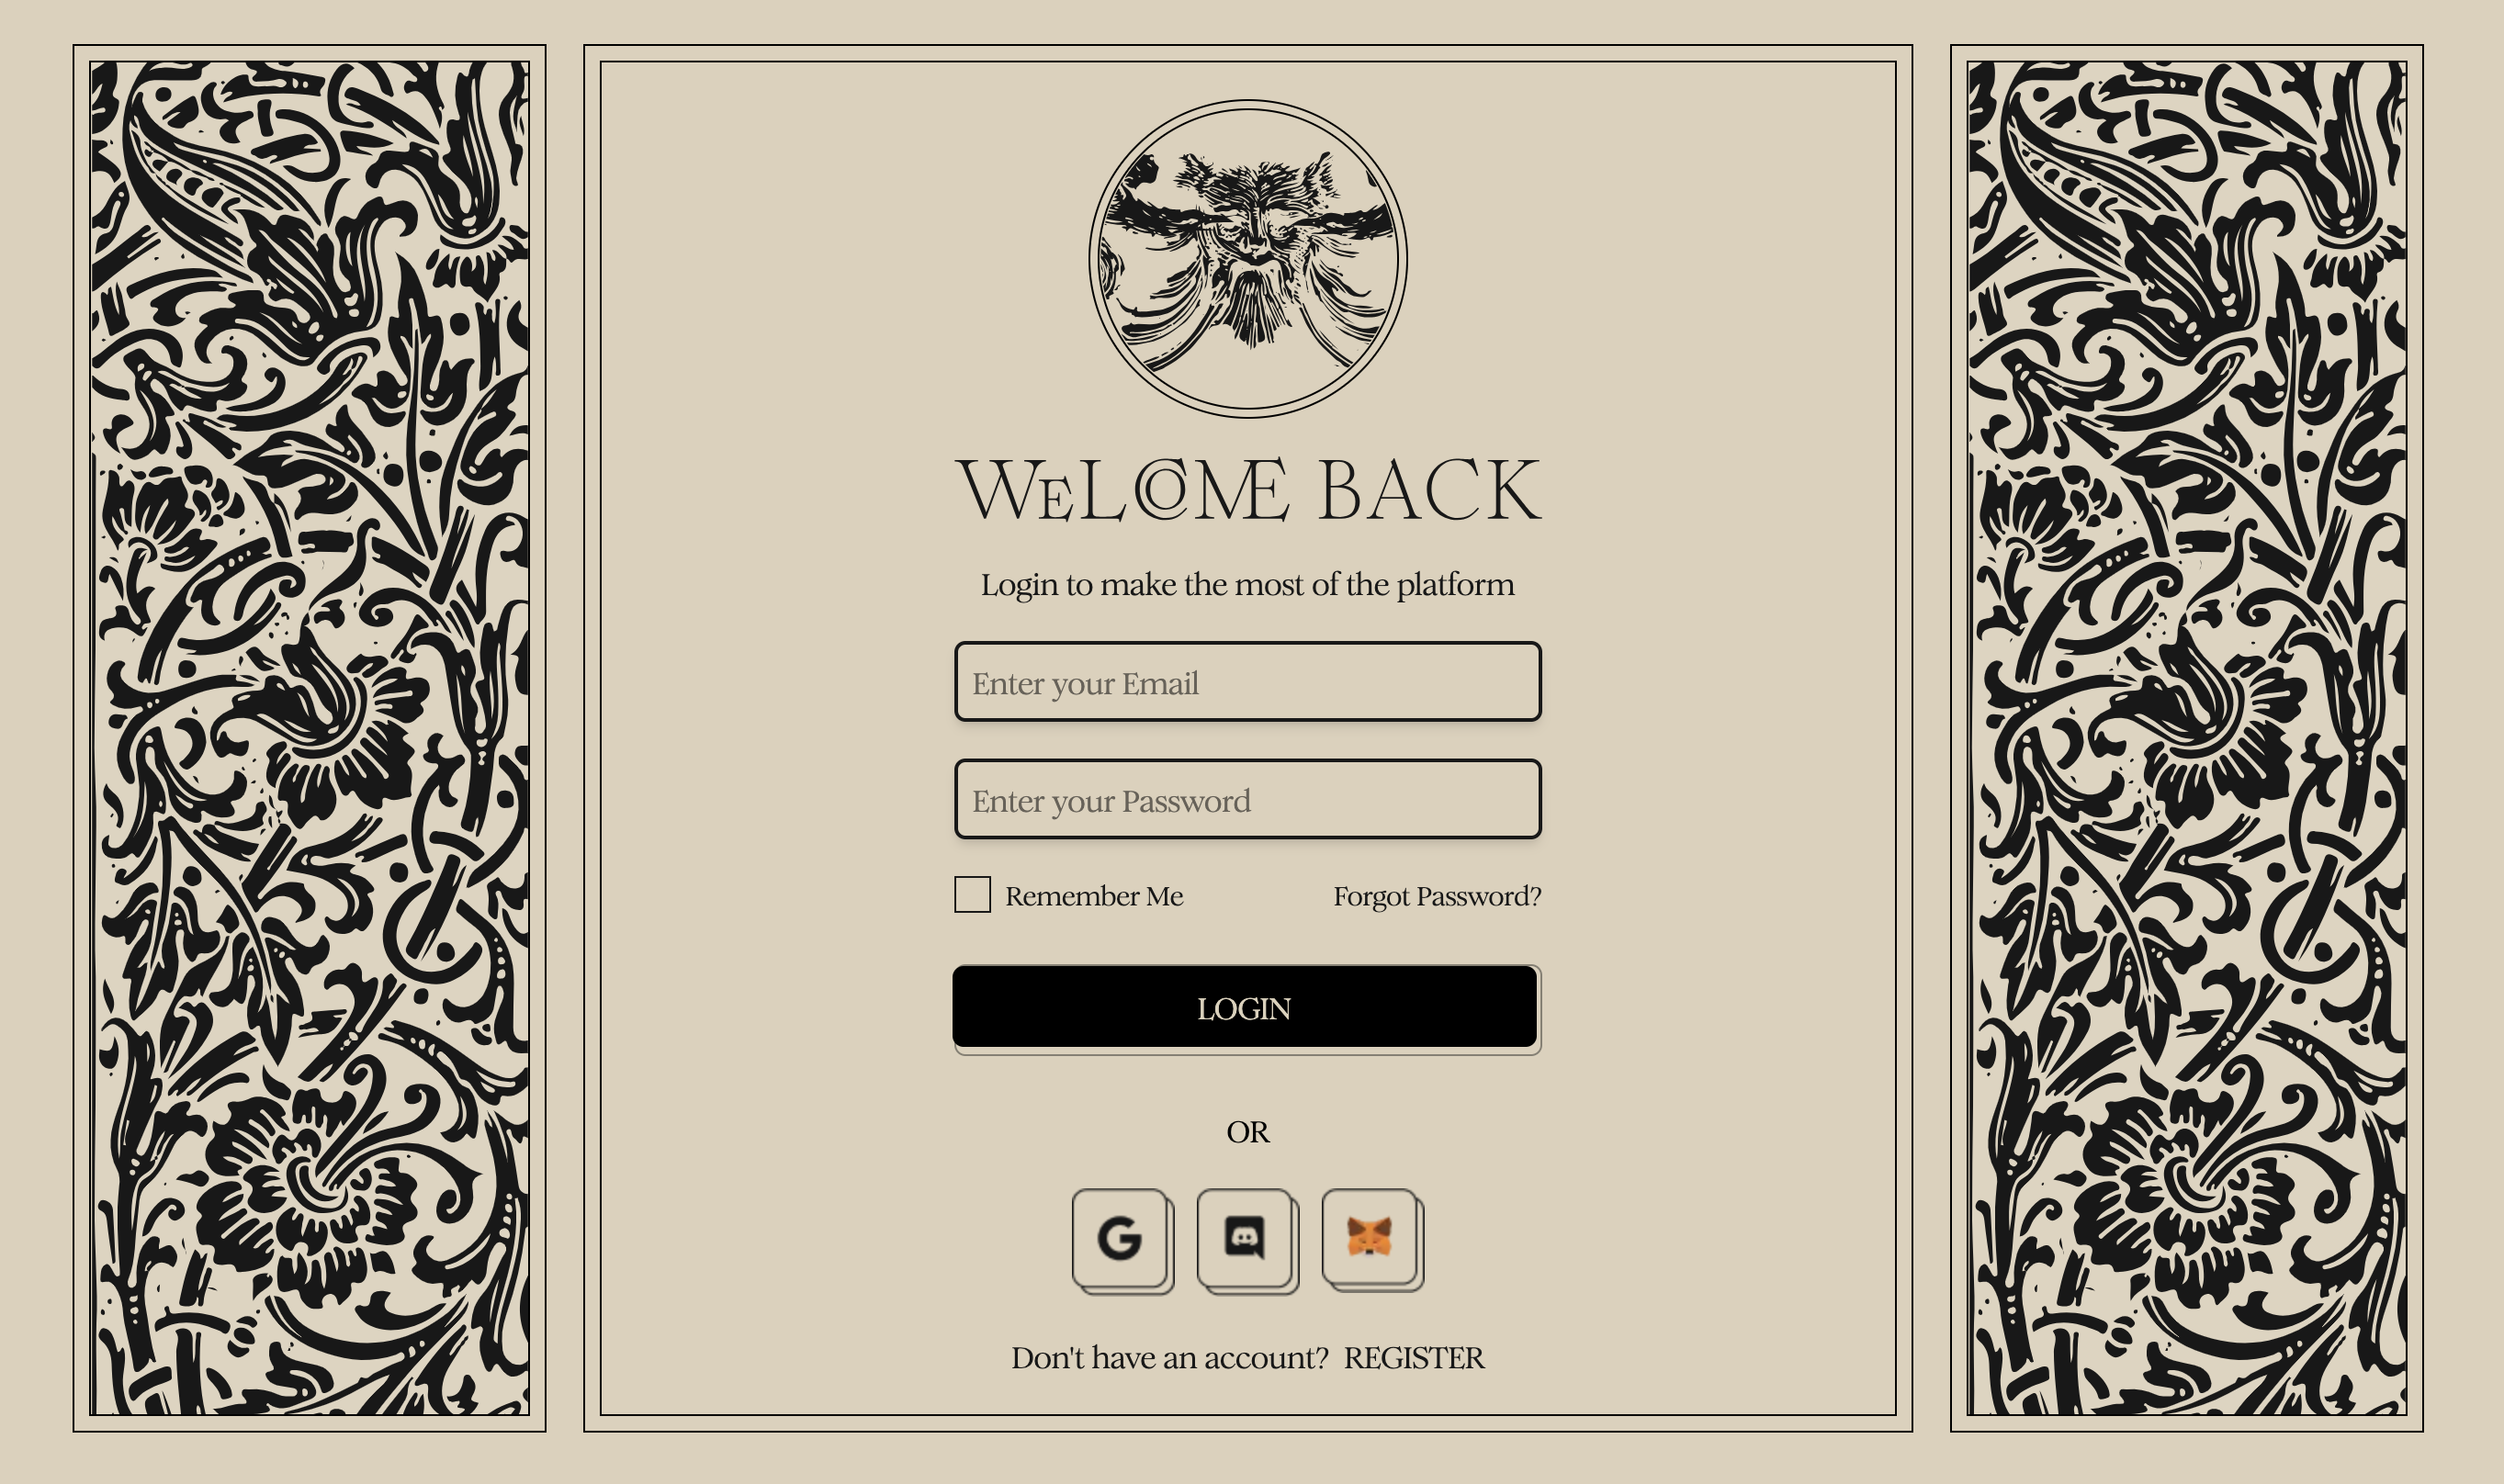 The login page for Blockbook